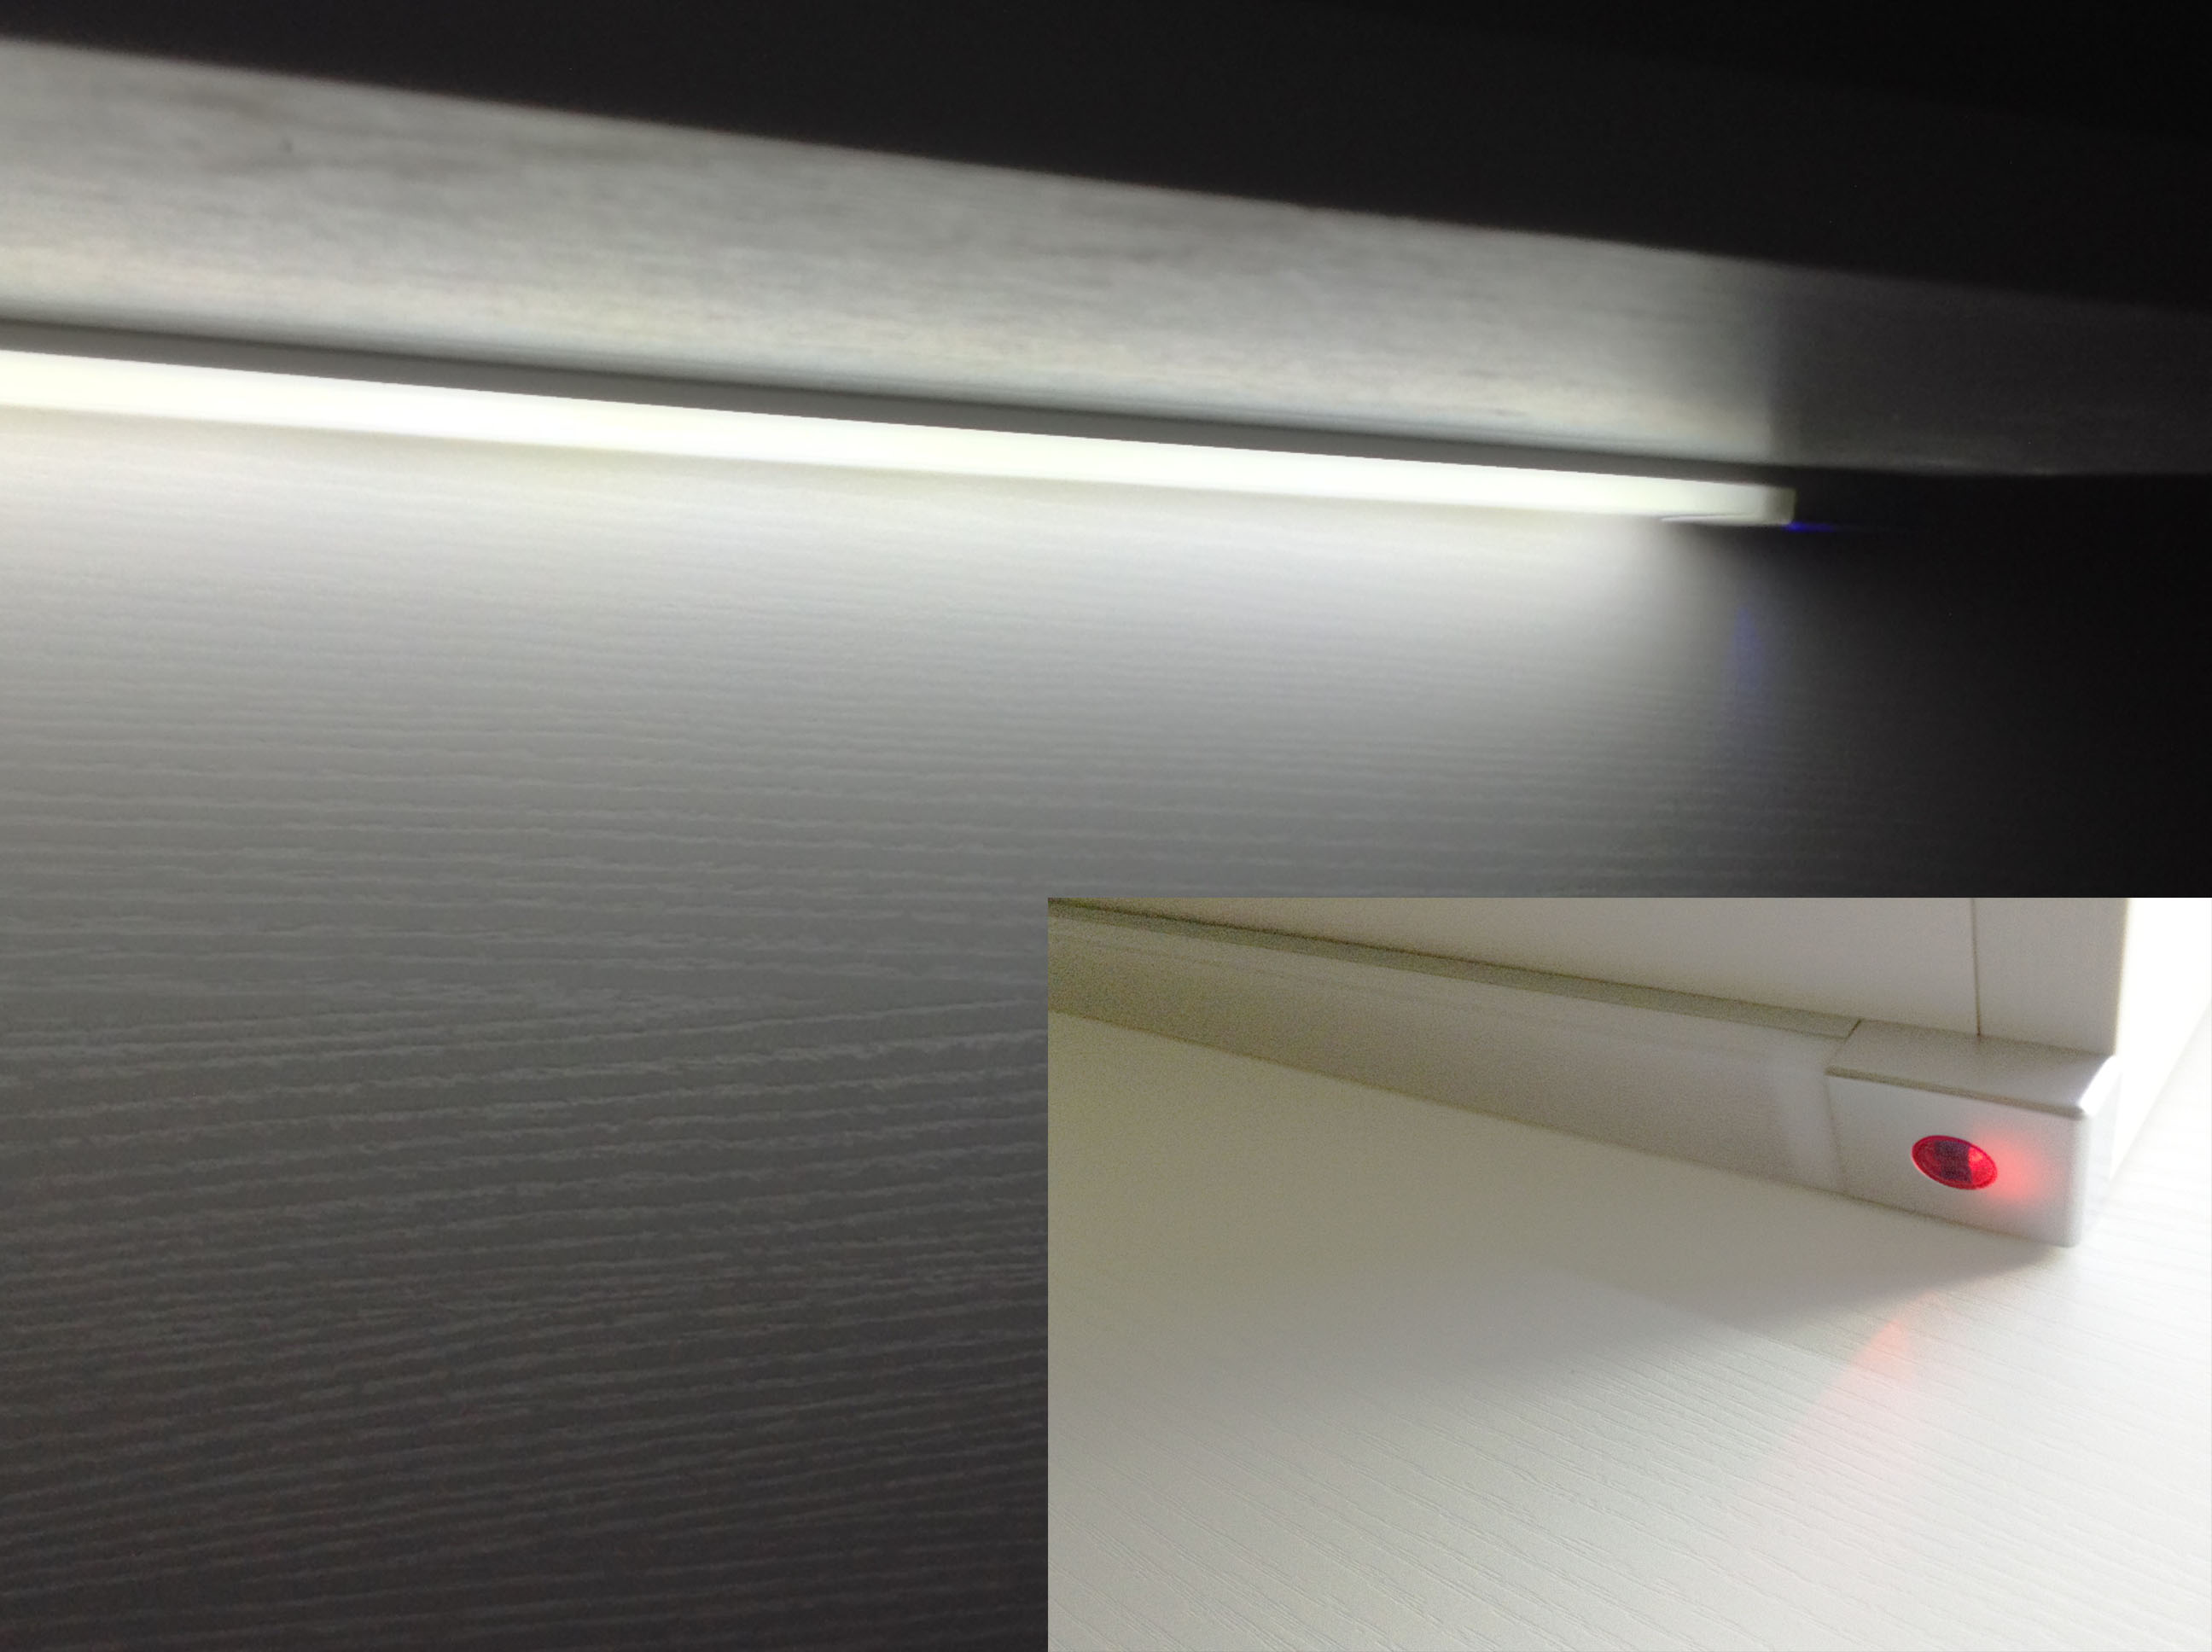 Sell LED cabinet light with motion sensor